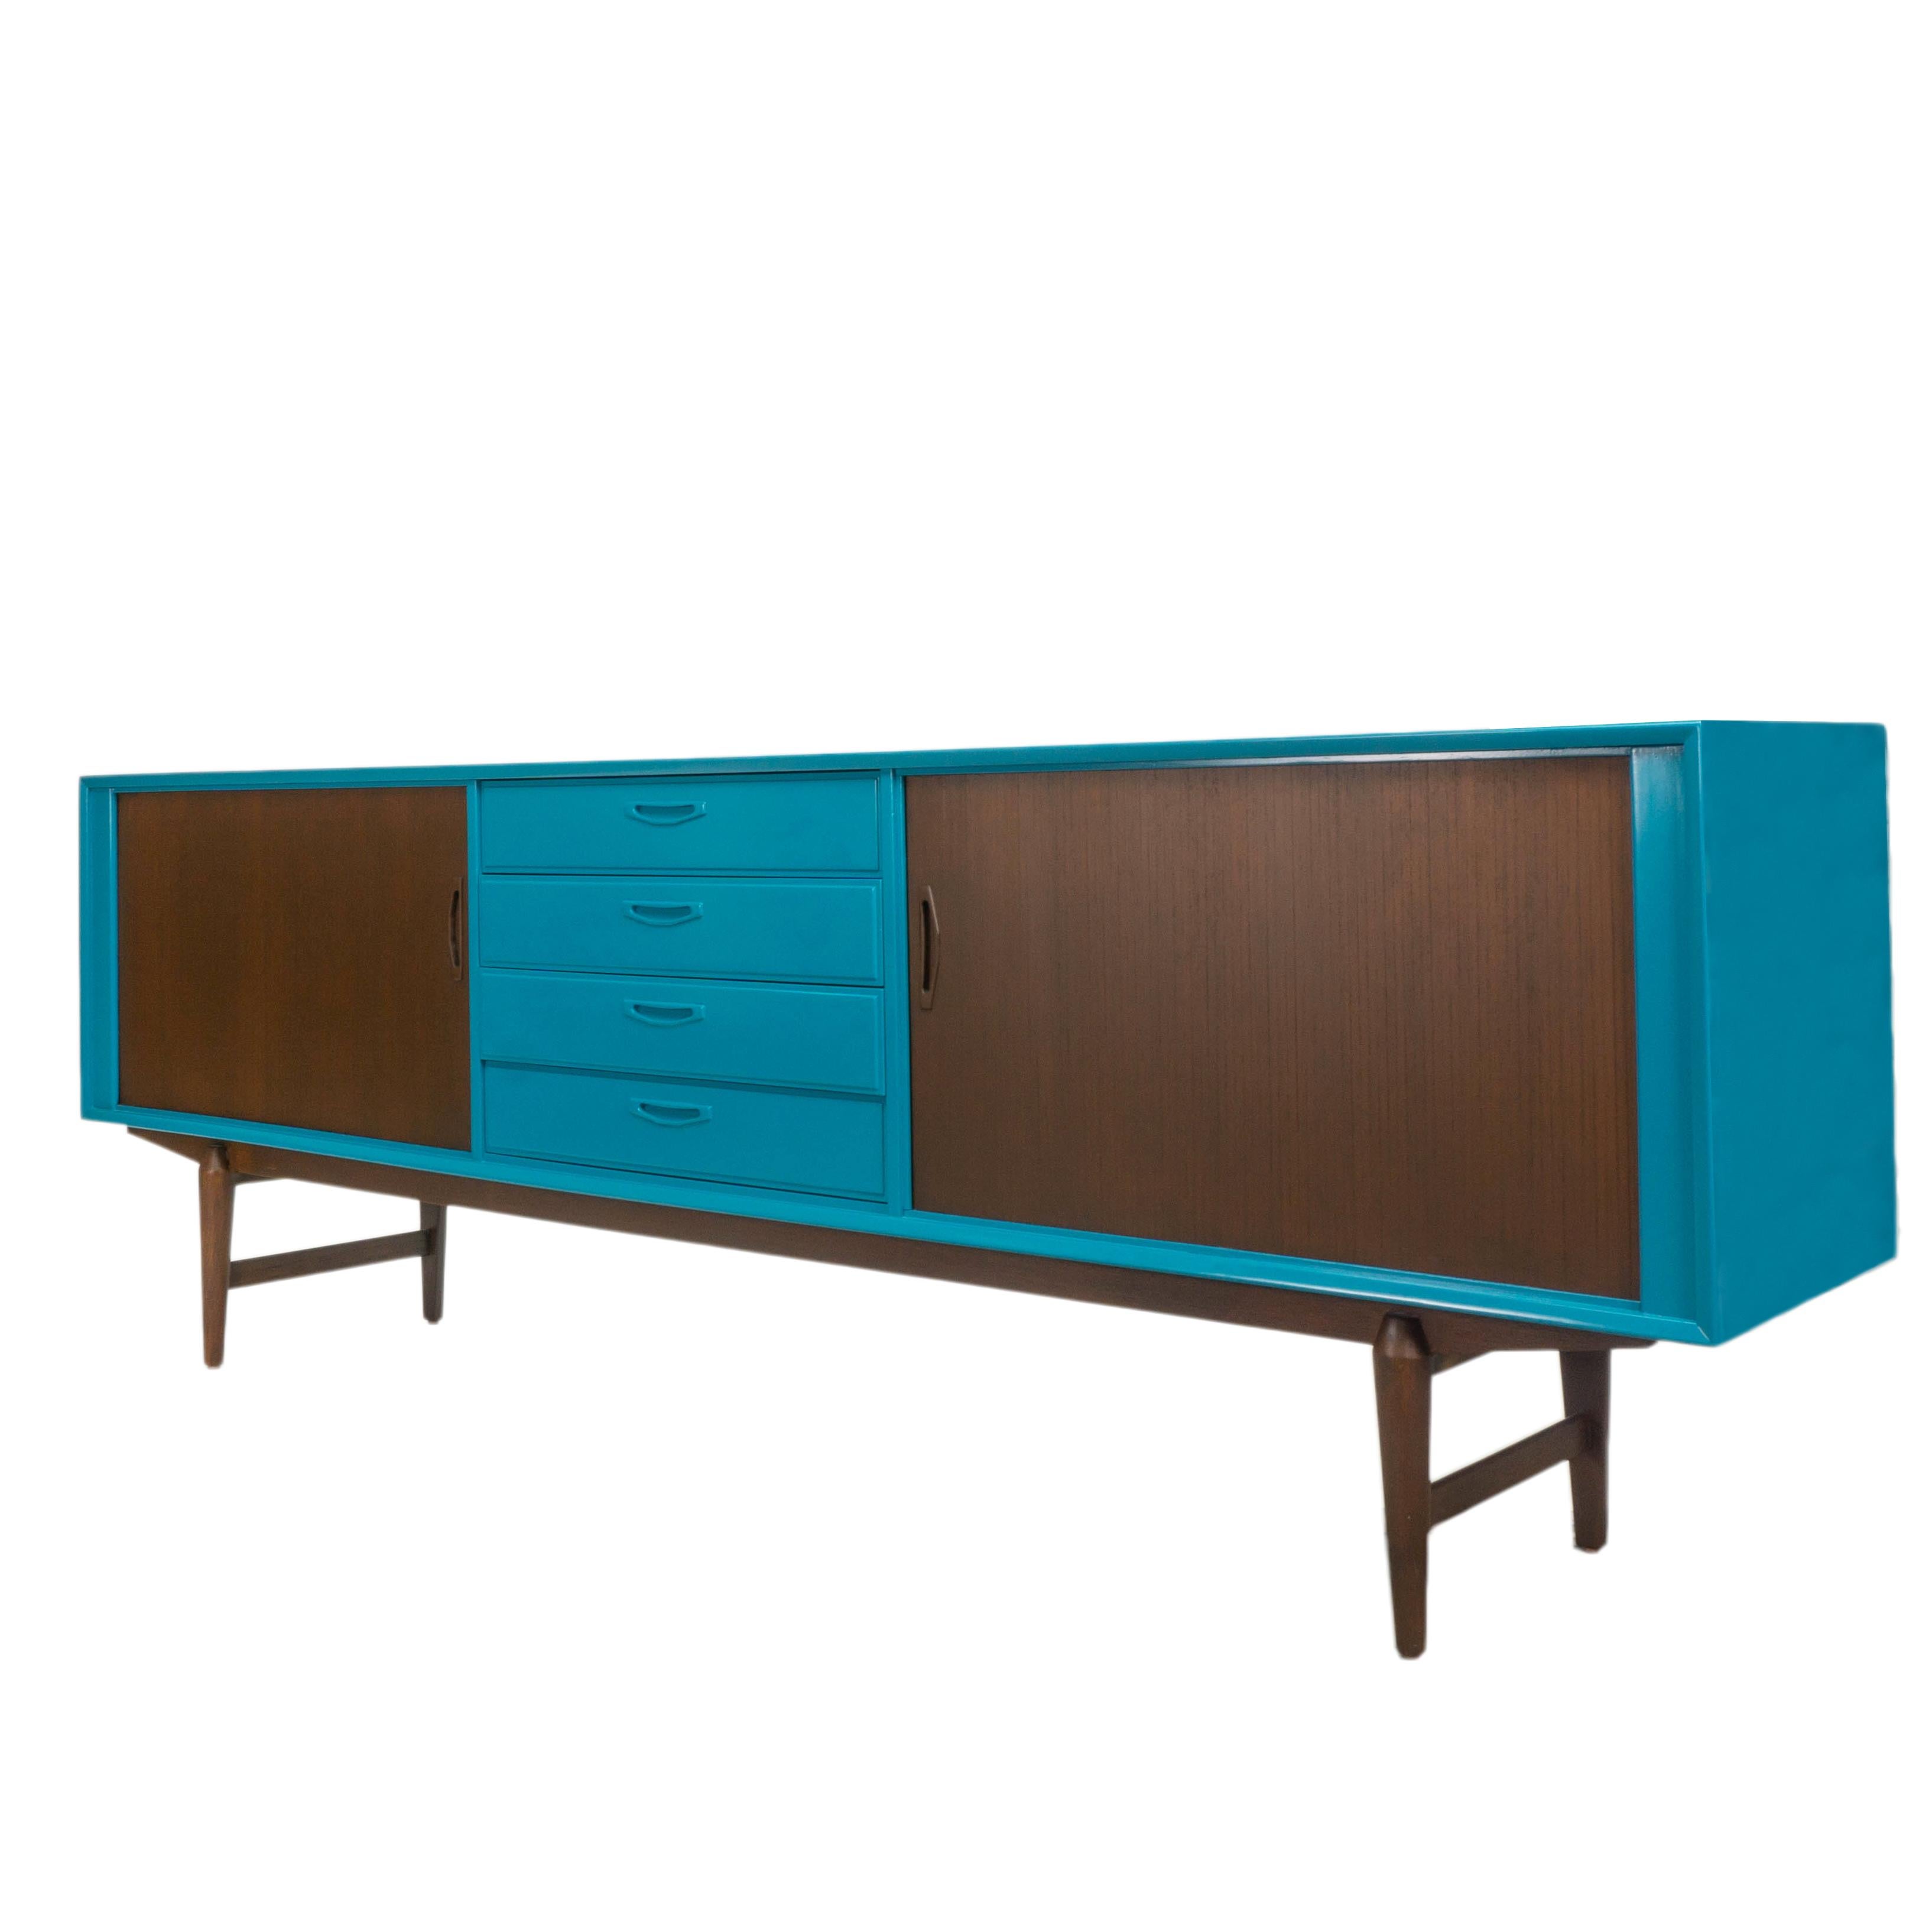 Mid-Century Modern Sideboard with Drawers In Excellent Condition For Sale In Greenwich, CT